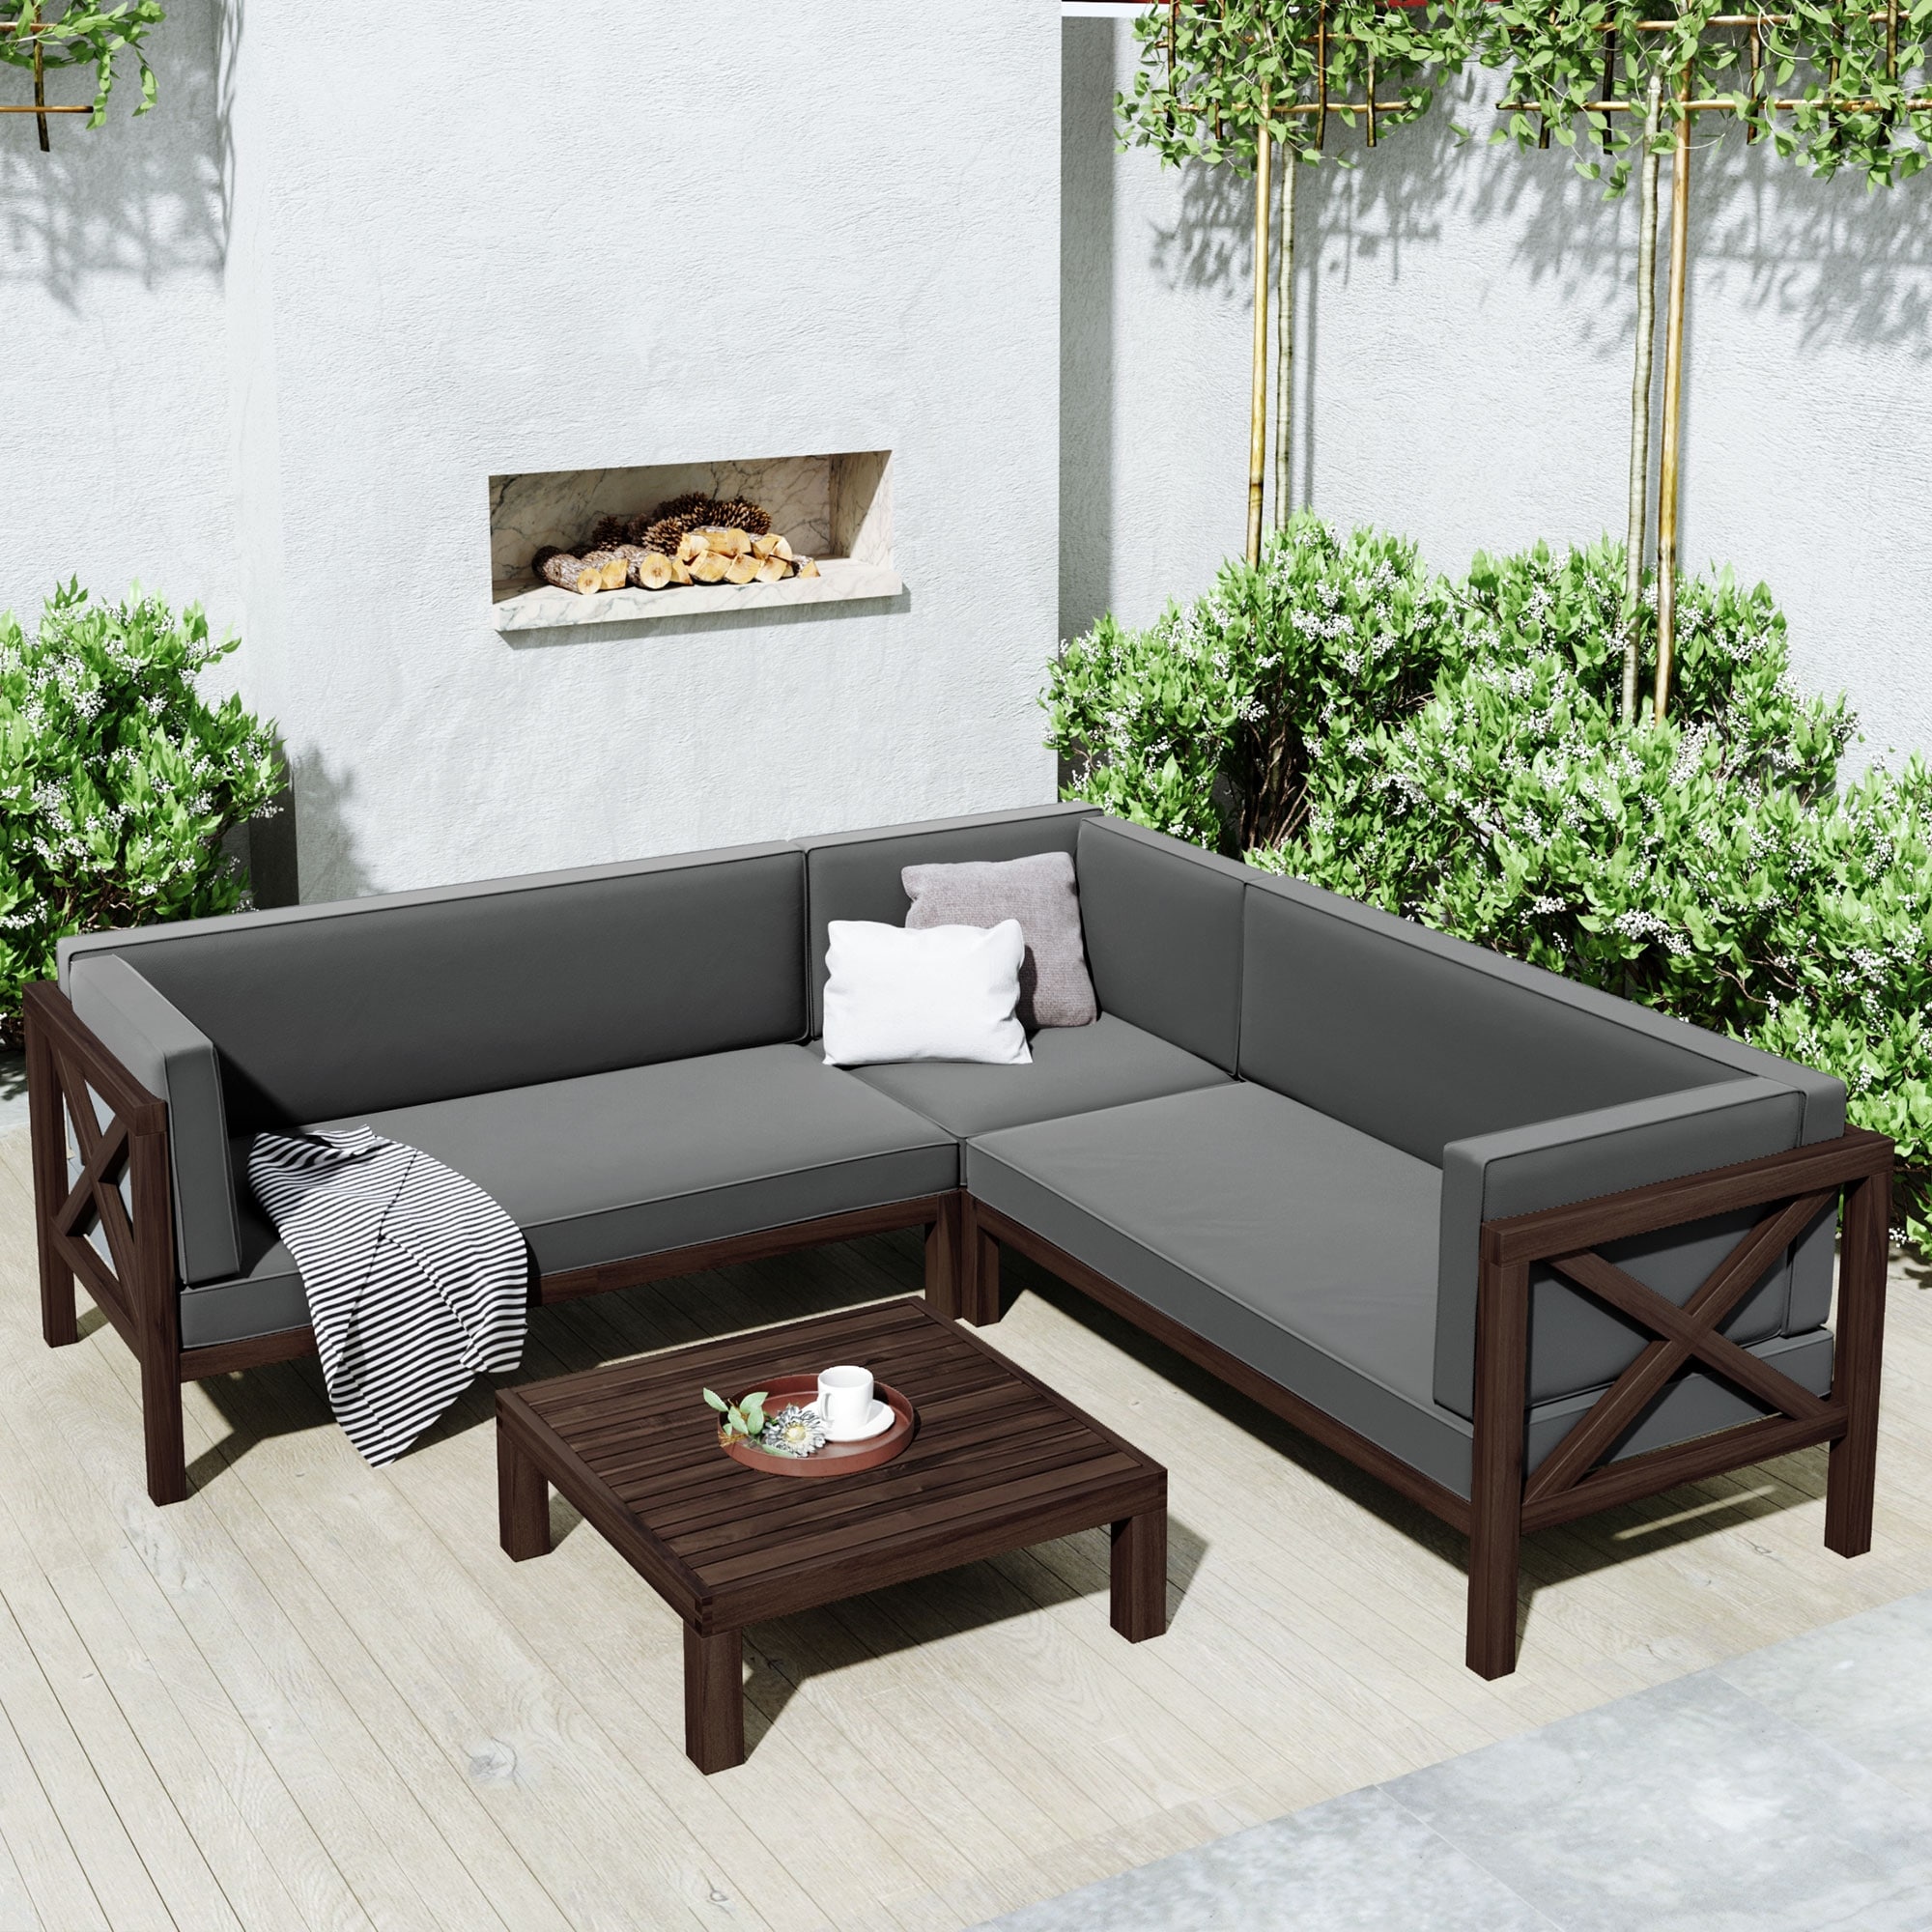 4-piece Sectional Seating Group With Cushions For Small Places